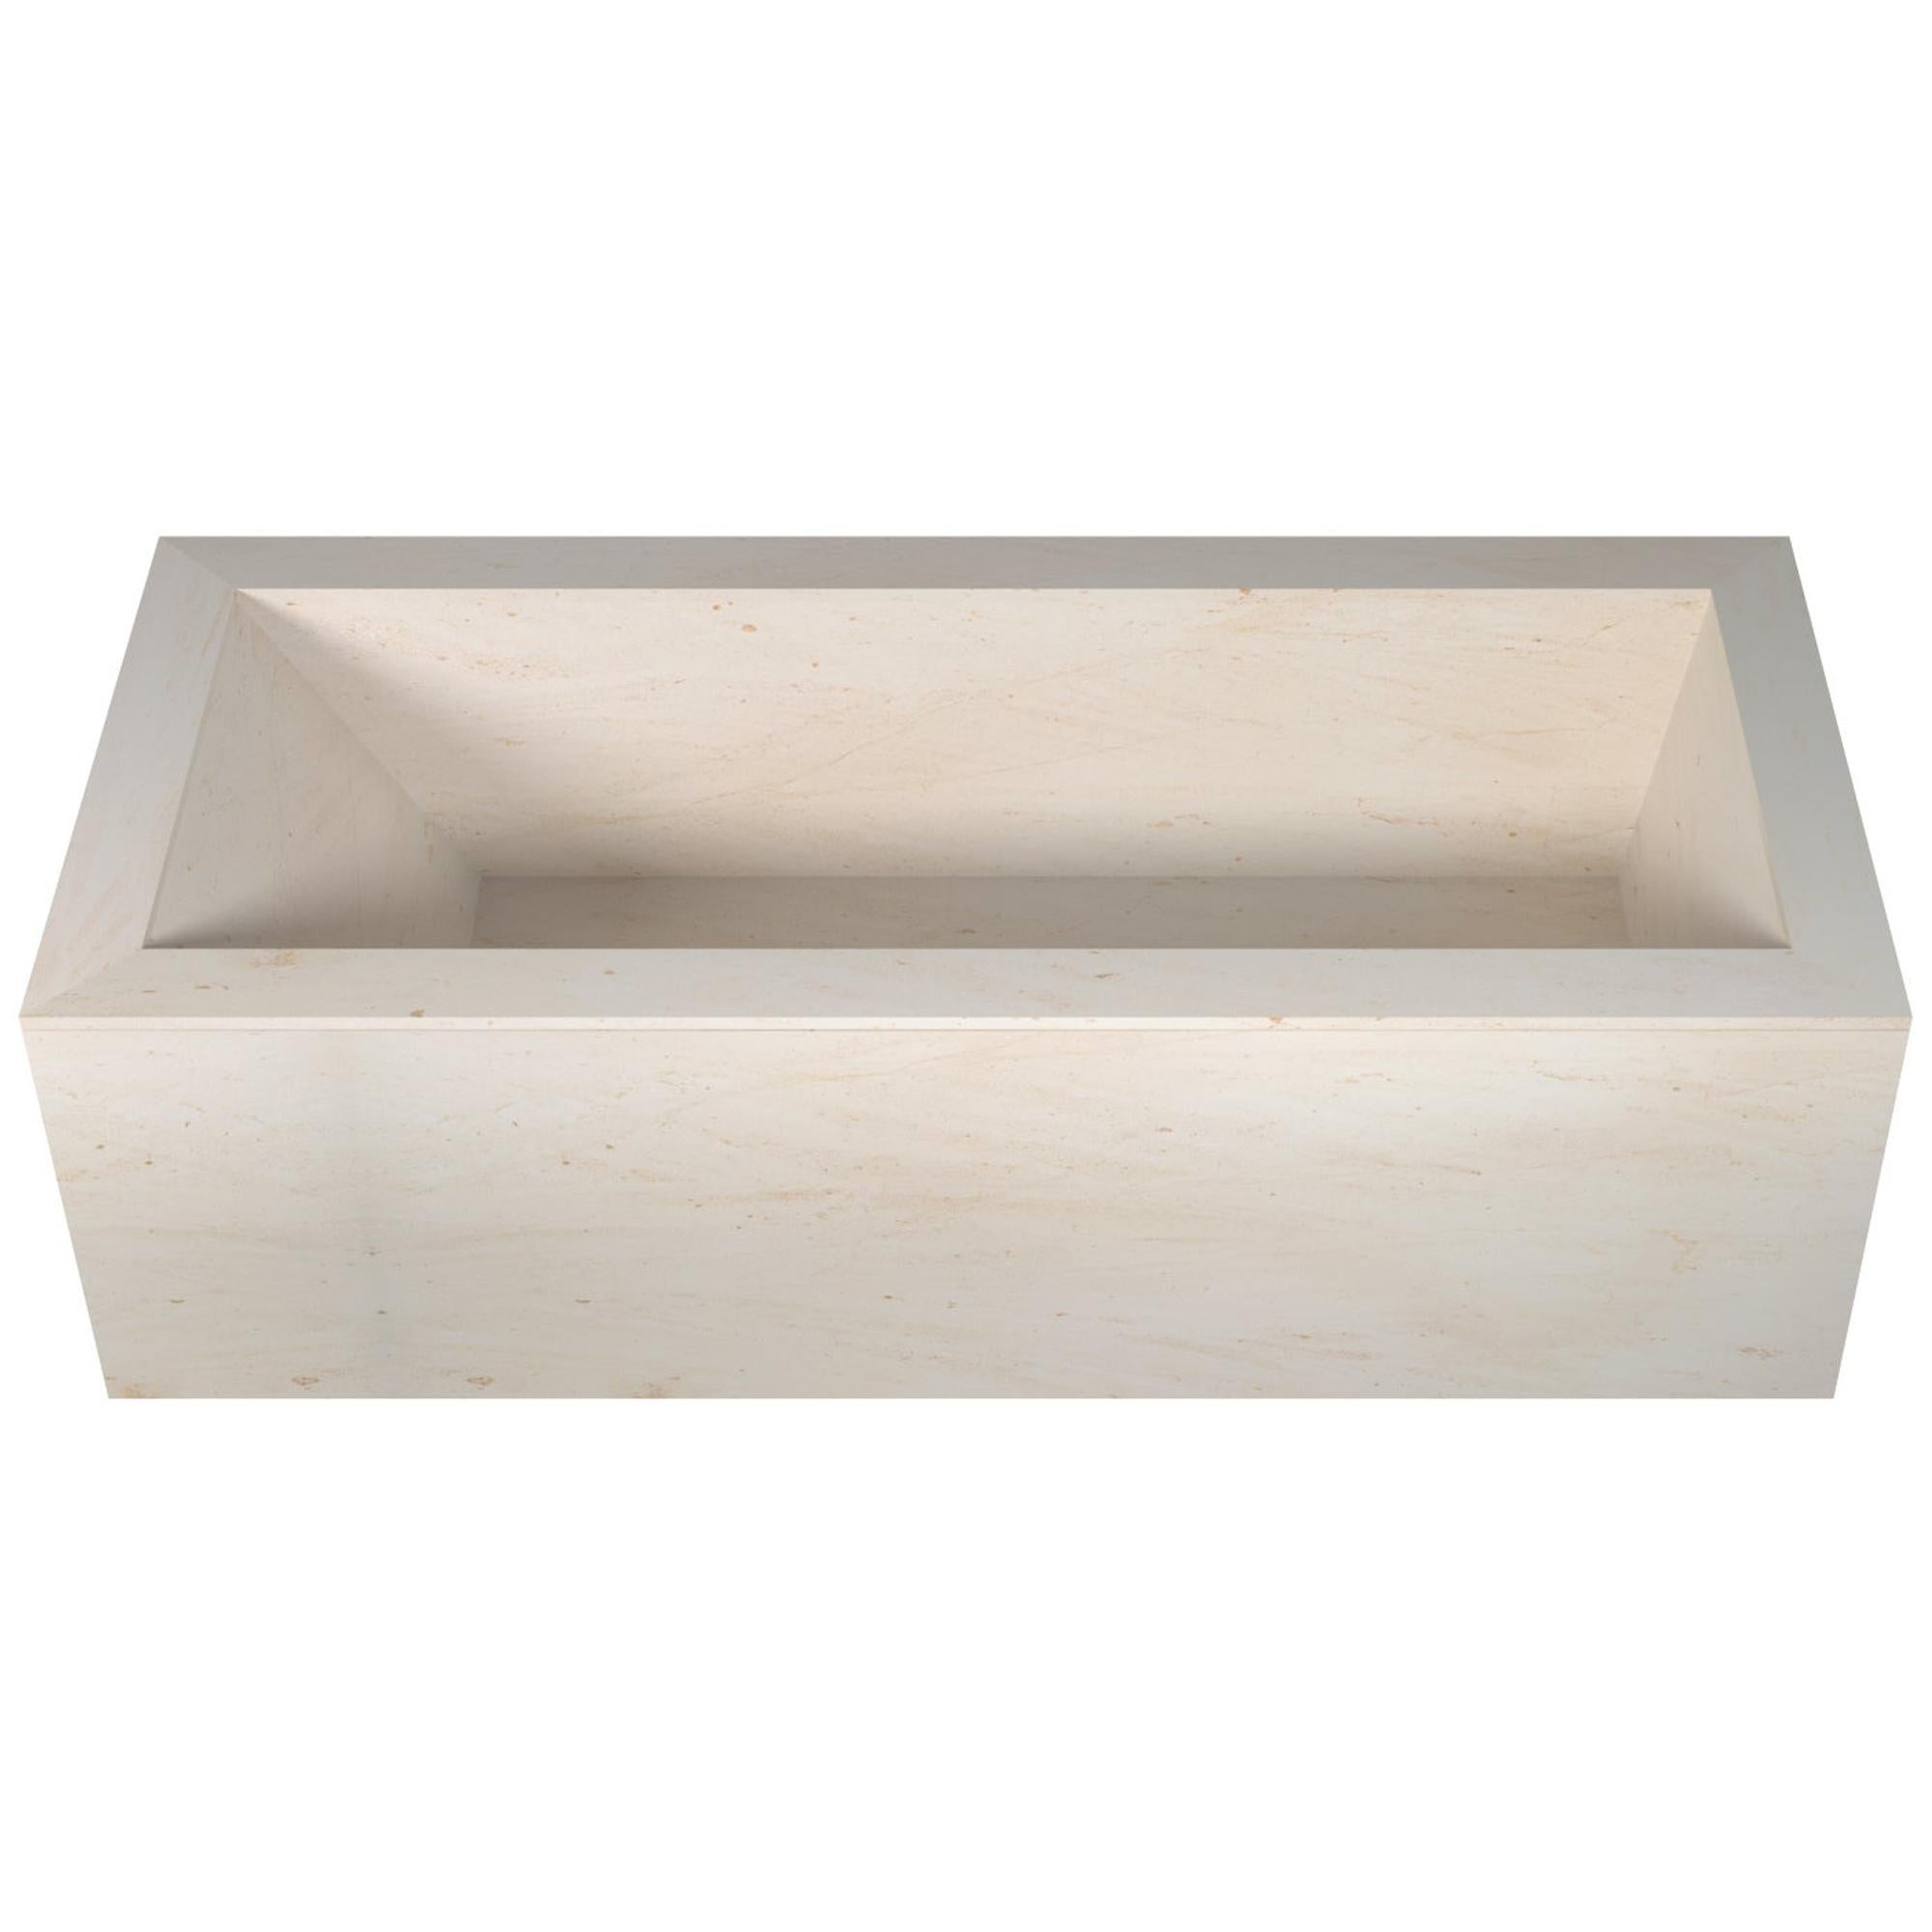 Salvatori Oyster Bathtub in Crema d'Orcia Stone with Honed Texture For Sale